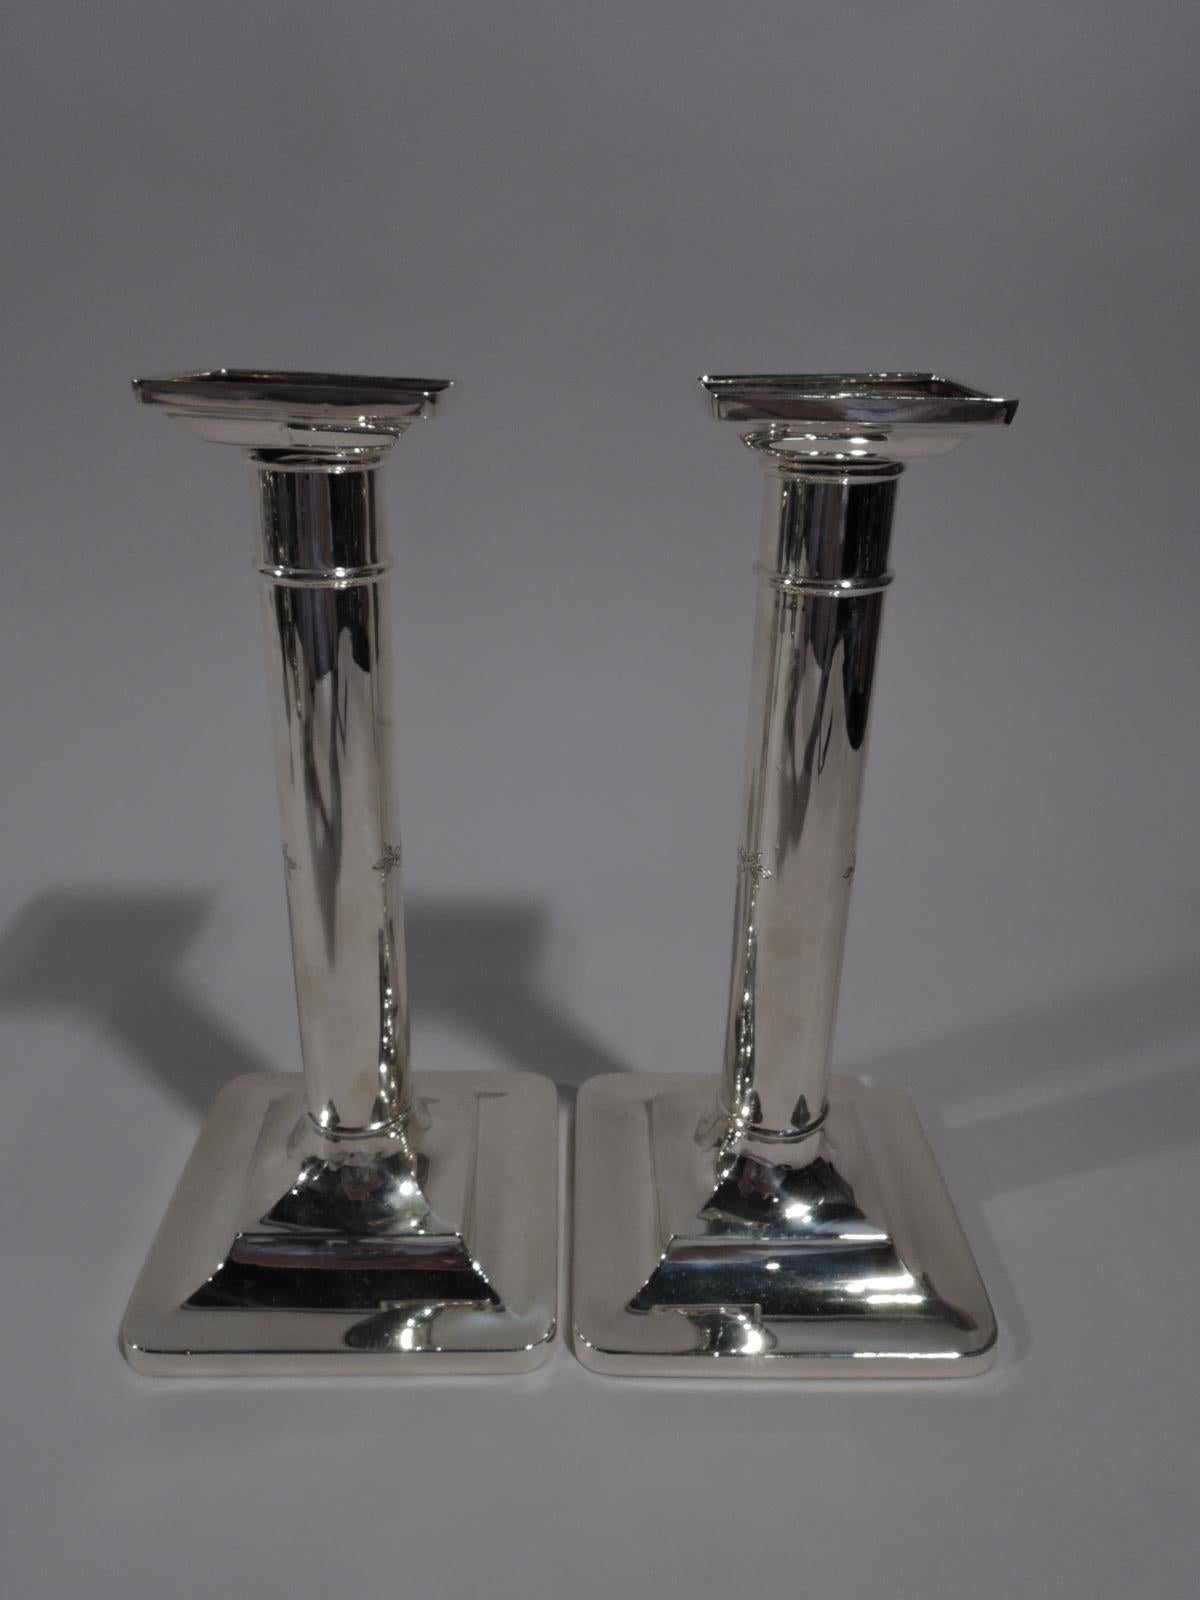 Pair of sterling silver candlesticks. Made by Tiffany & Co. in New York, circa 1910. Column shaft with knop at base; foot square and stepped; bobéches square and detachable. Spare Classicism with engraved strap work armorial cartouche (vacant).